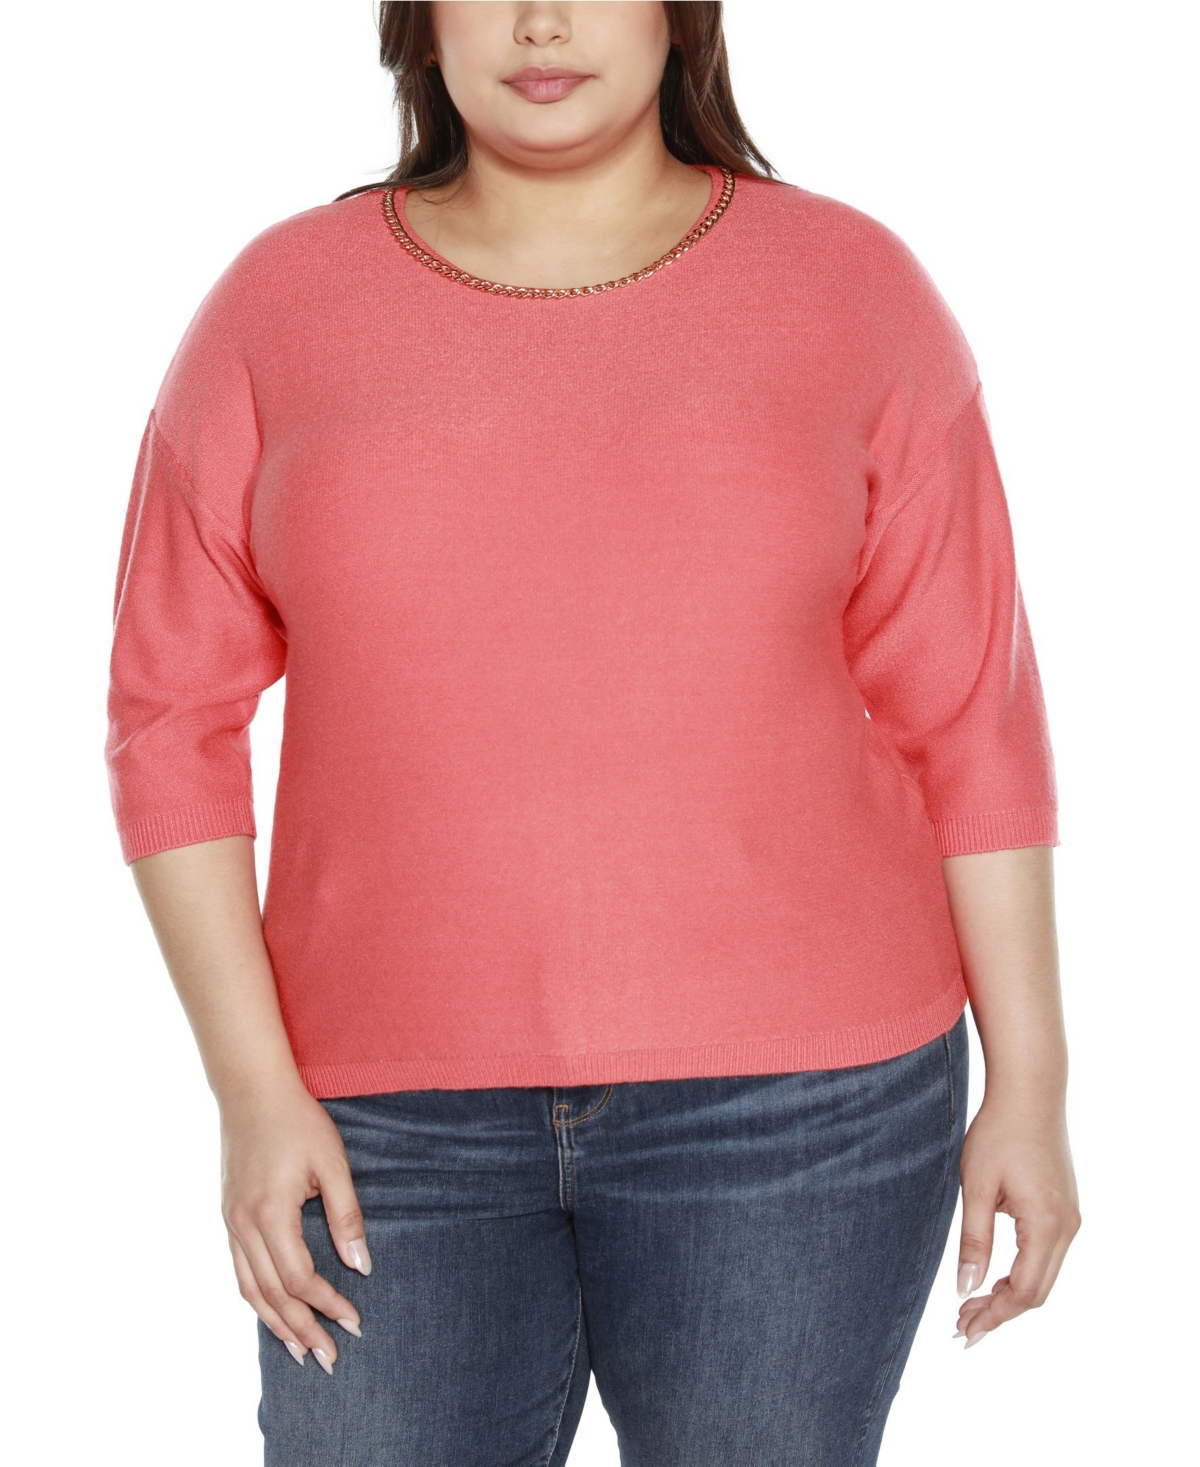 Black Label Plus Size Chain Detail 3/4-Sleeve Sweater - Coral Crush